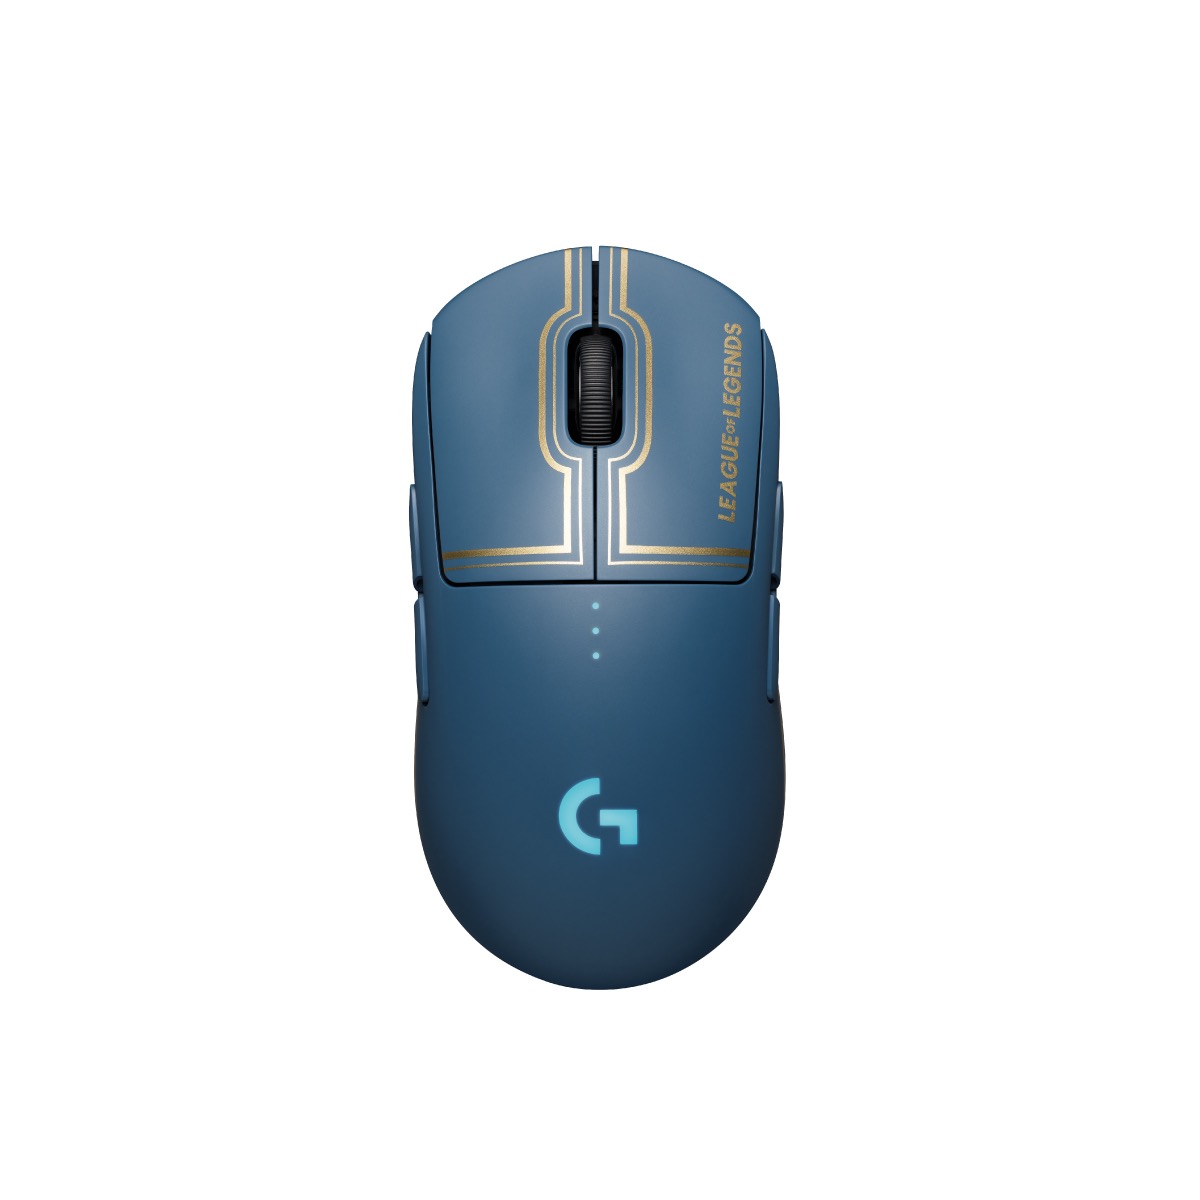 Logitech G Pro League of Legends Edition Wireless Gaming Mouse, , large image number 0